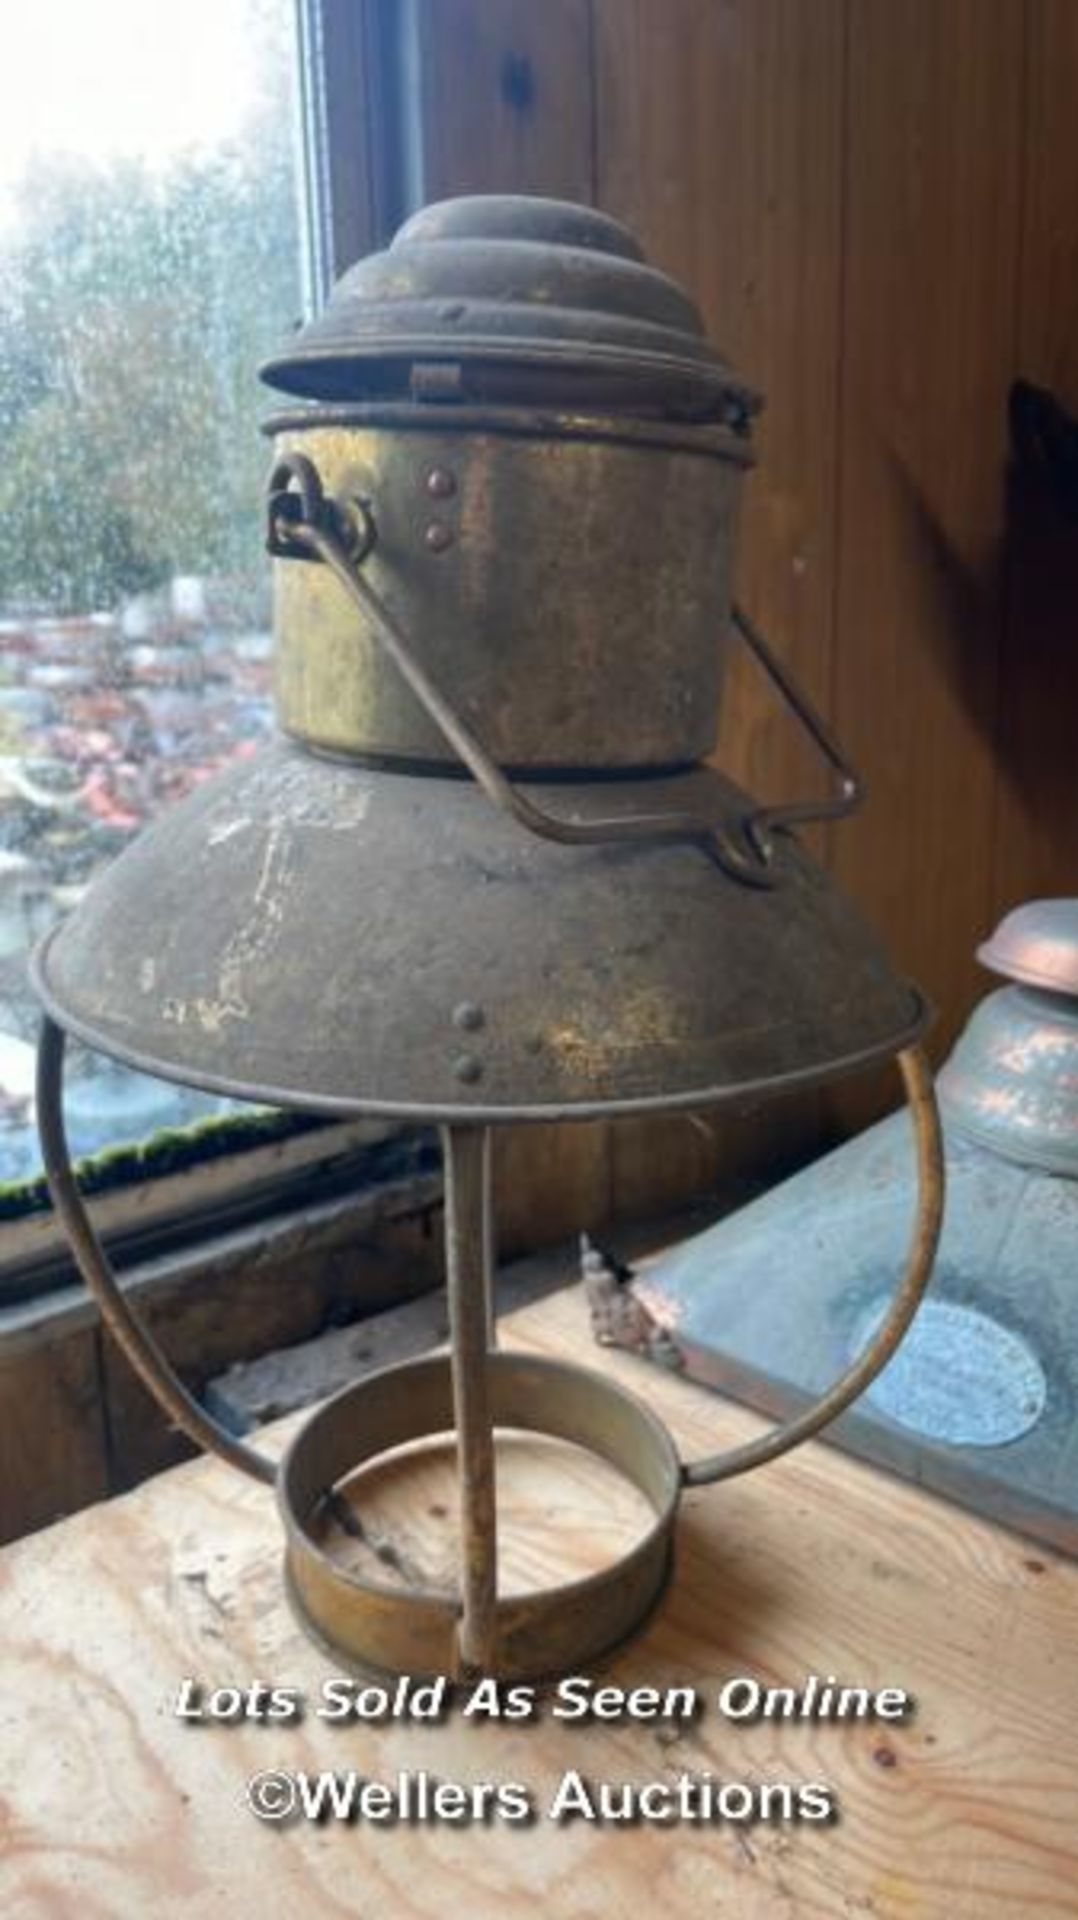 5X ASSORTED METAL LIGHT LAMP COVERS INCLUDING JOSEPH KNIGHT LAMP CO. LTD, LARGEST APPROX 59CM HIGH - Image 4 of 6